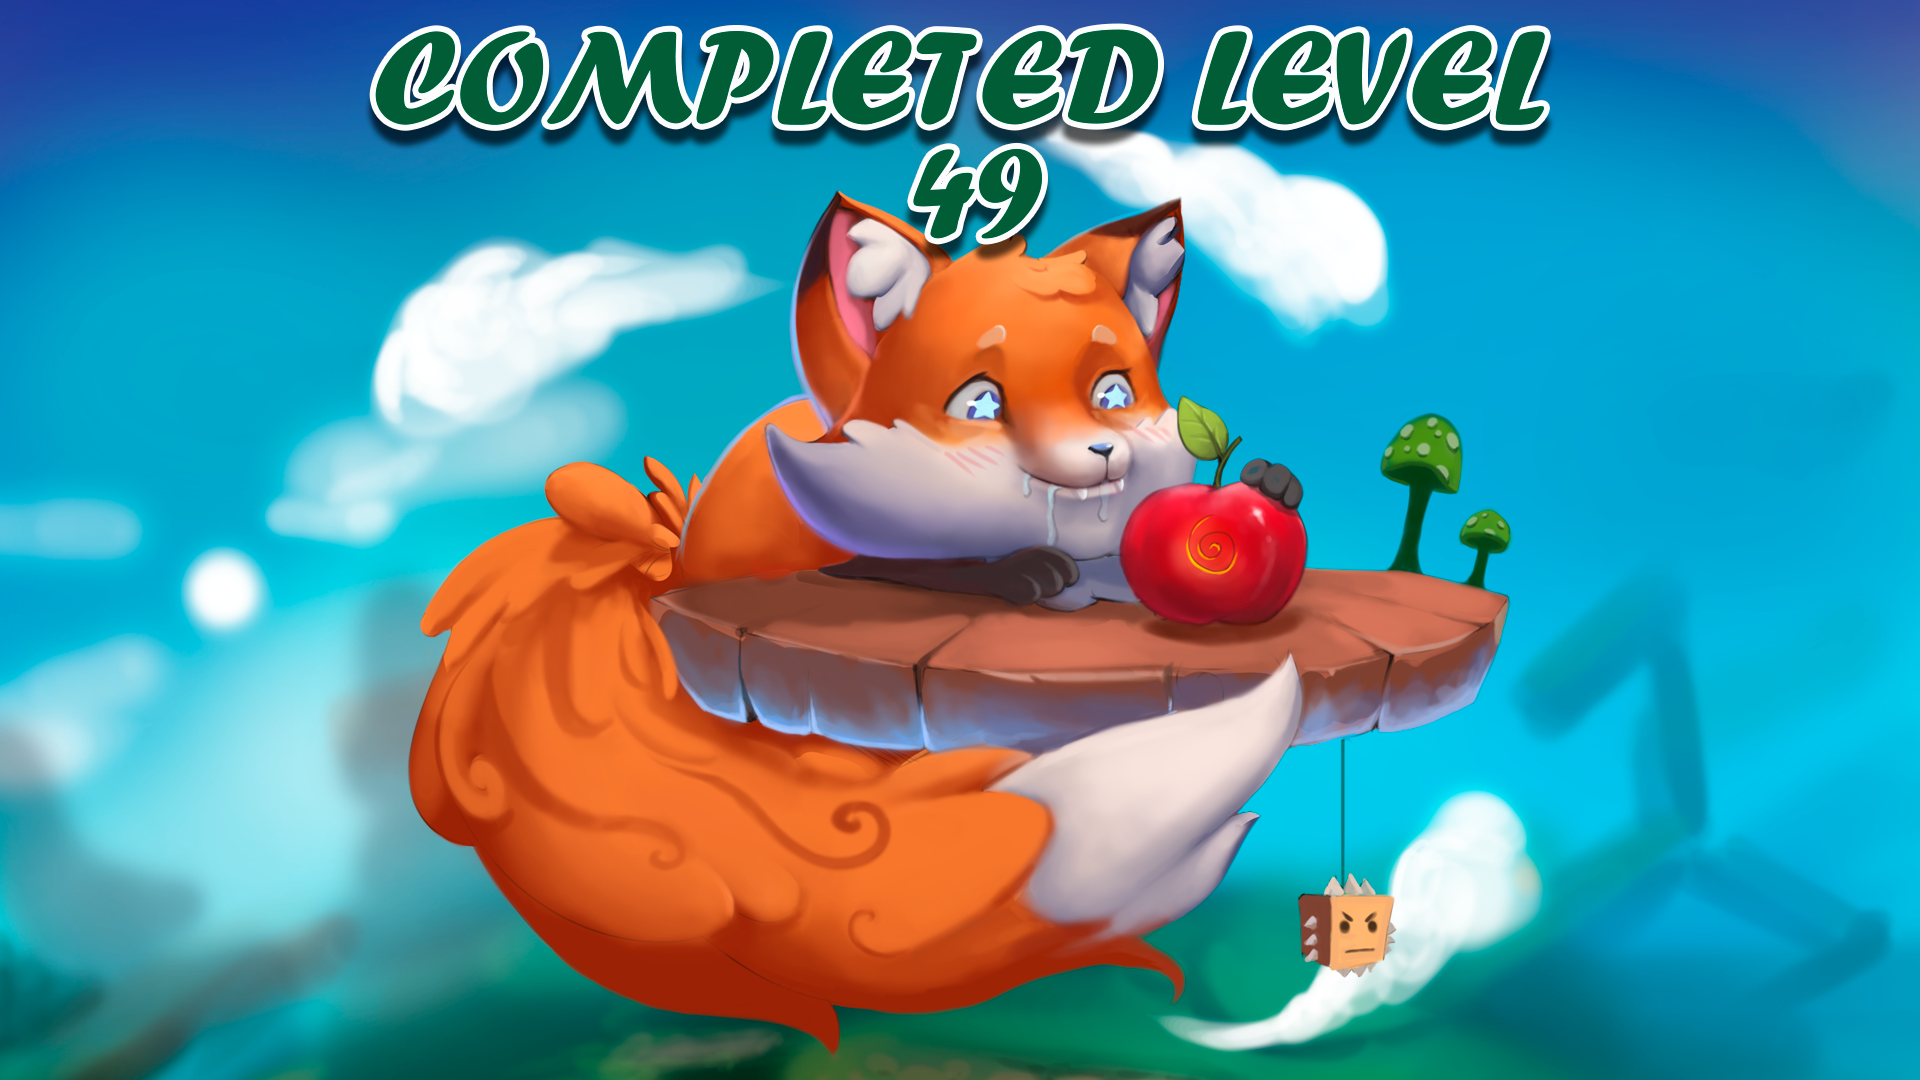 49 levels completed